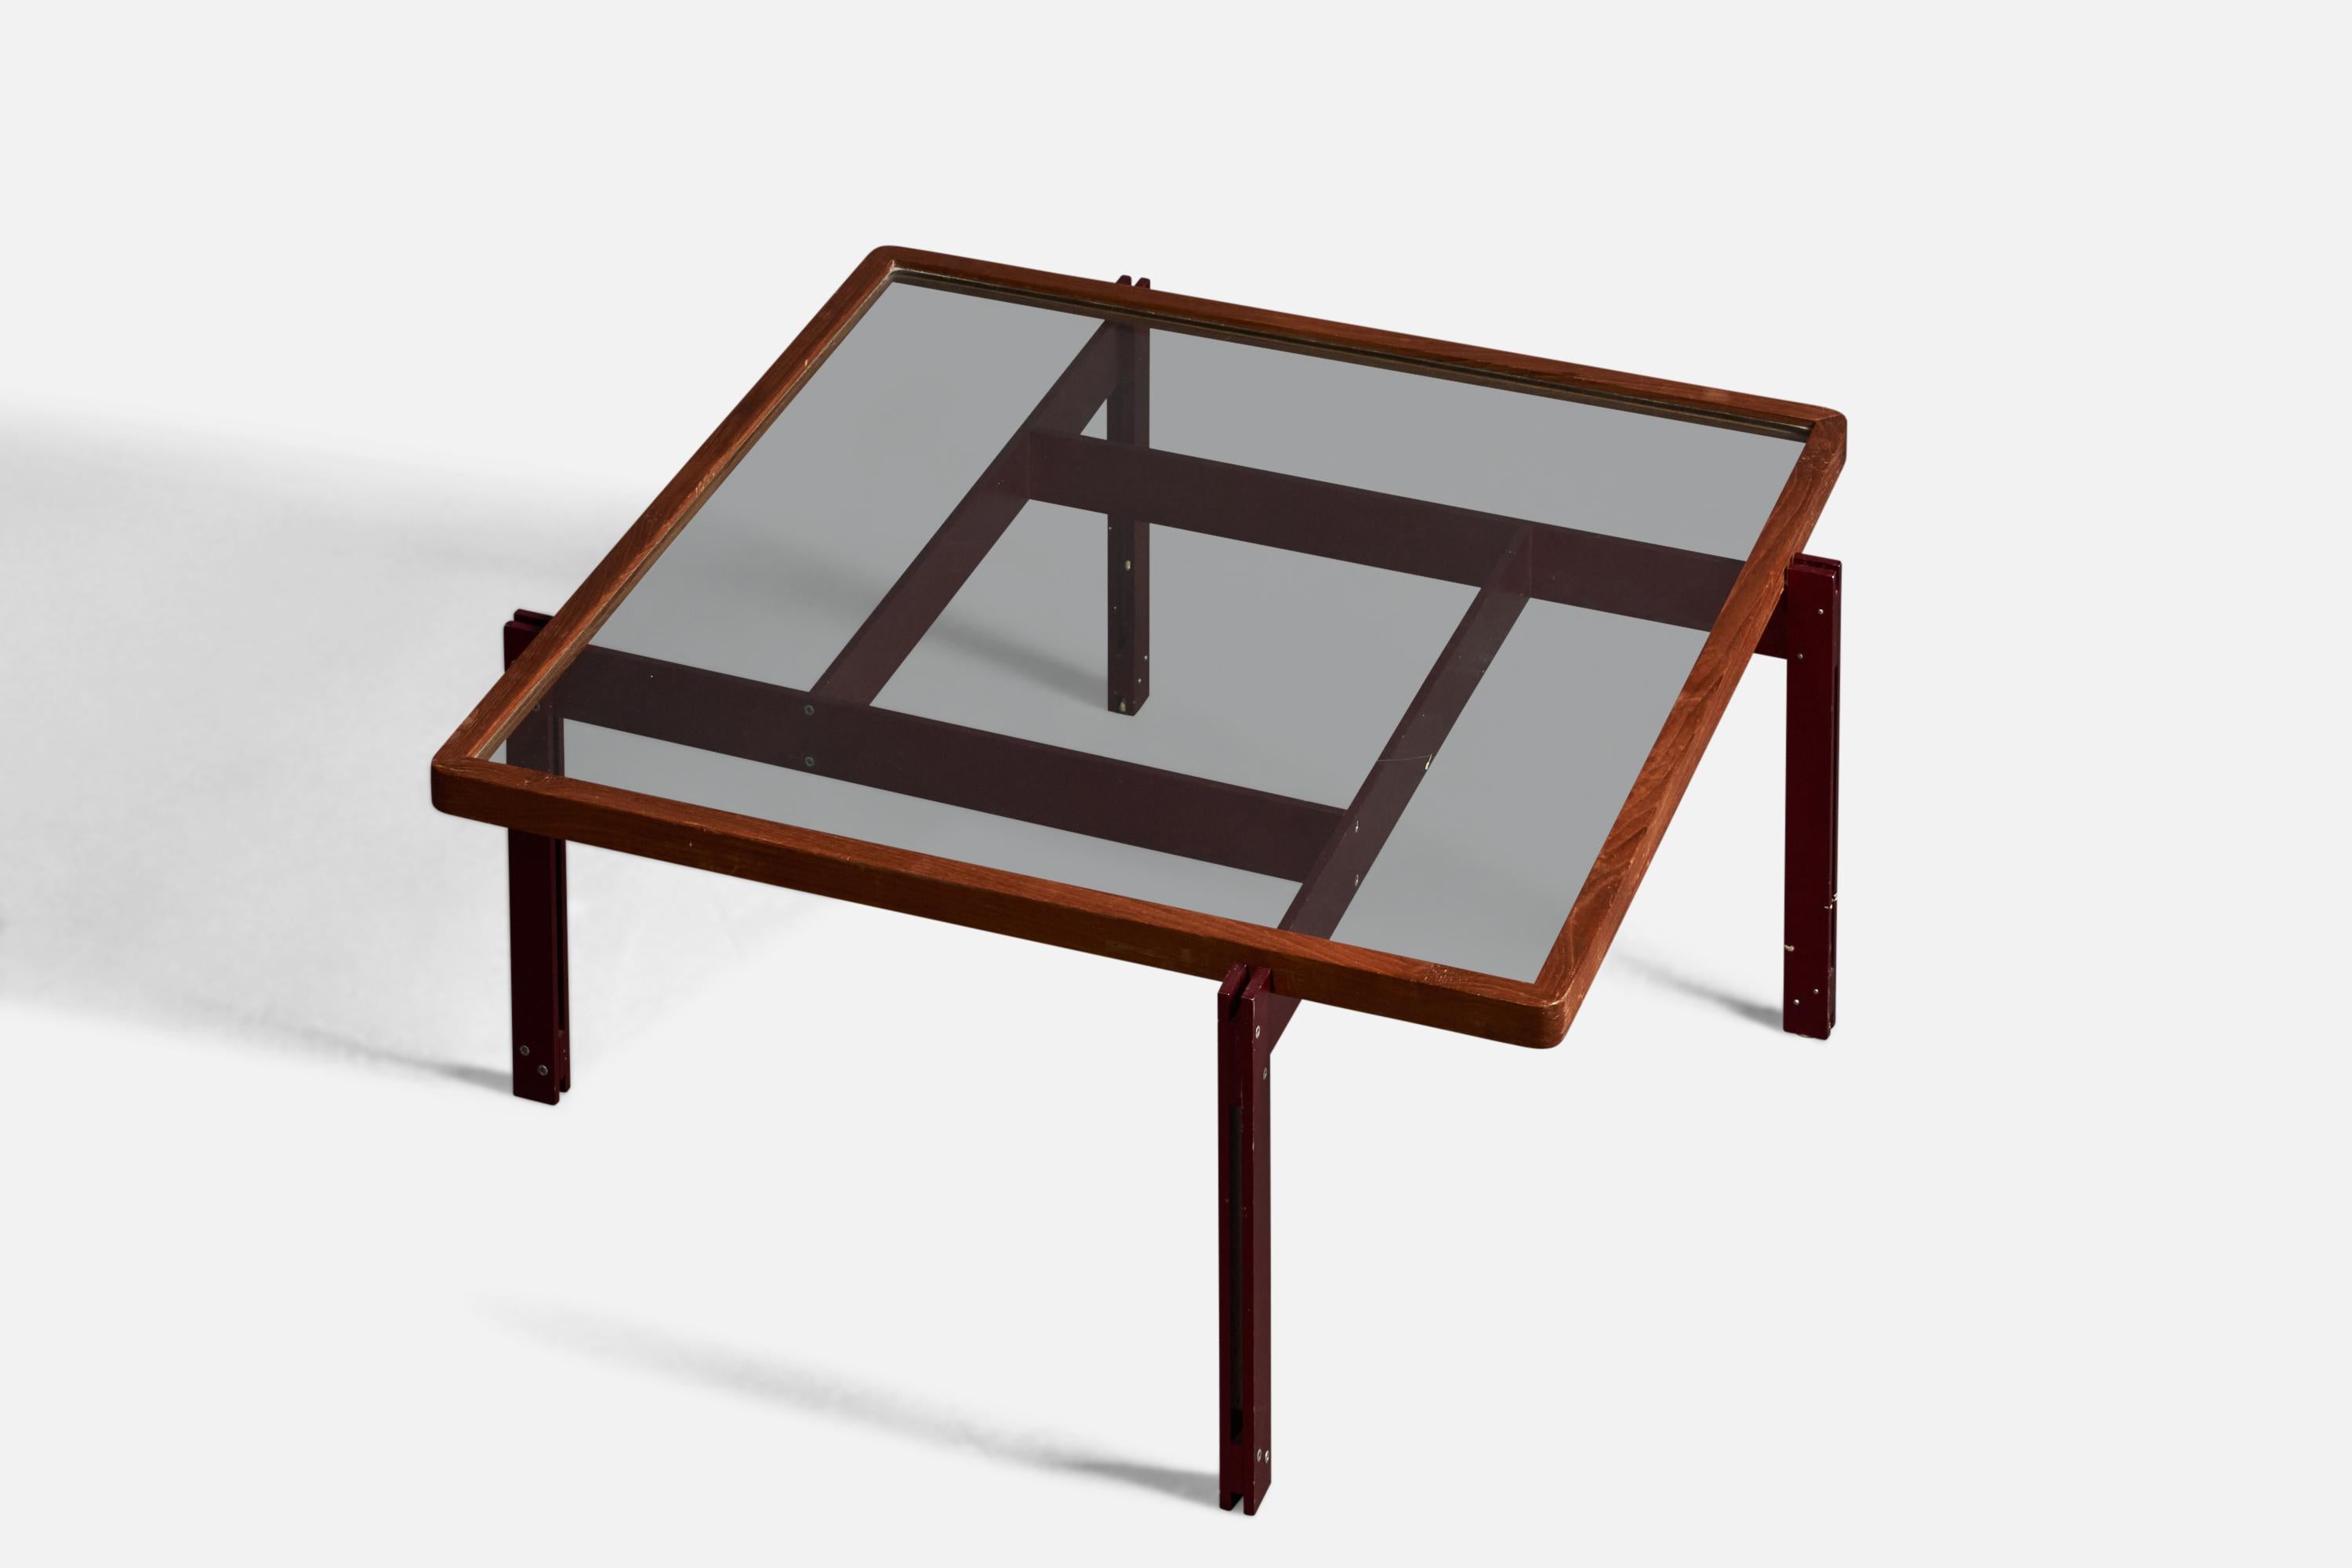 A teak, glass and red-lacquered metal coffee or cocktail table, designed and produced in Italy, c. 1960s.